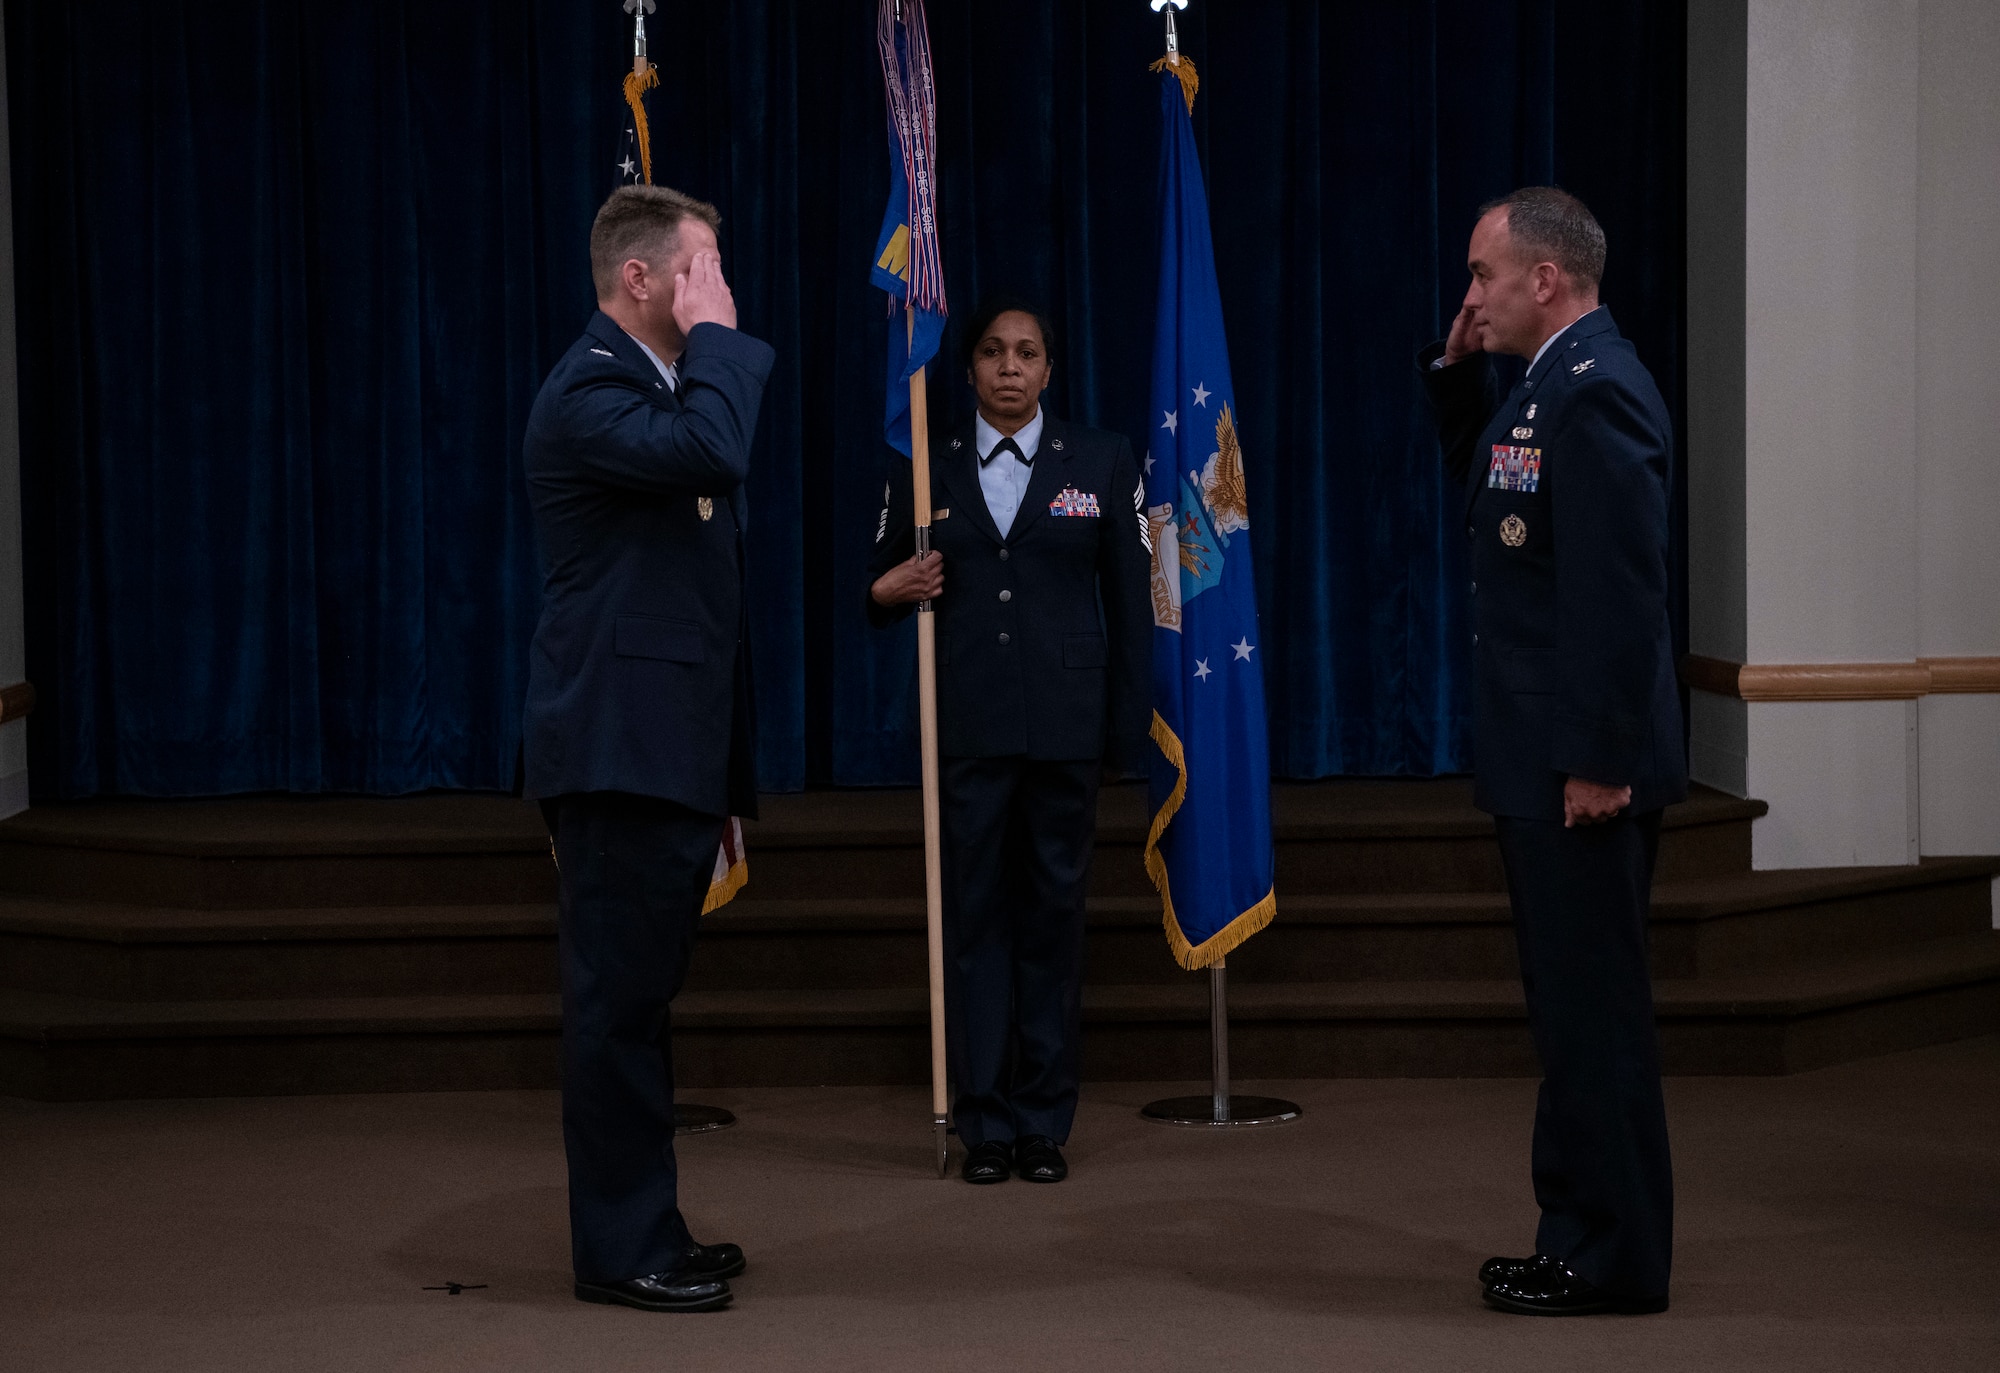 Colonel Peter Bonetti, 90th Missile Wing commander, salutes, Colonel Paul Toth, 90th Medical Group incoming commander, as he assumes command of the 90th MDG during a change of command ceremony June, 23, 2020, on F.E. Warren Air Force Base, Wyo. A change of command ceremony is a tradition that represents a formal transfer of authority and responsibility from the outgoing commander to the incoming commander. (U.S. Air Force photo by Senior Airman Abbigayle Williams)